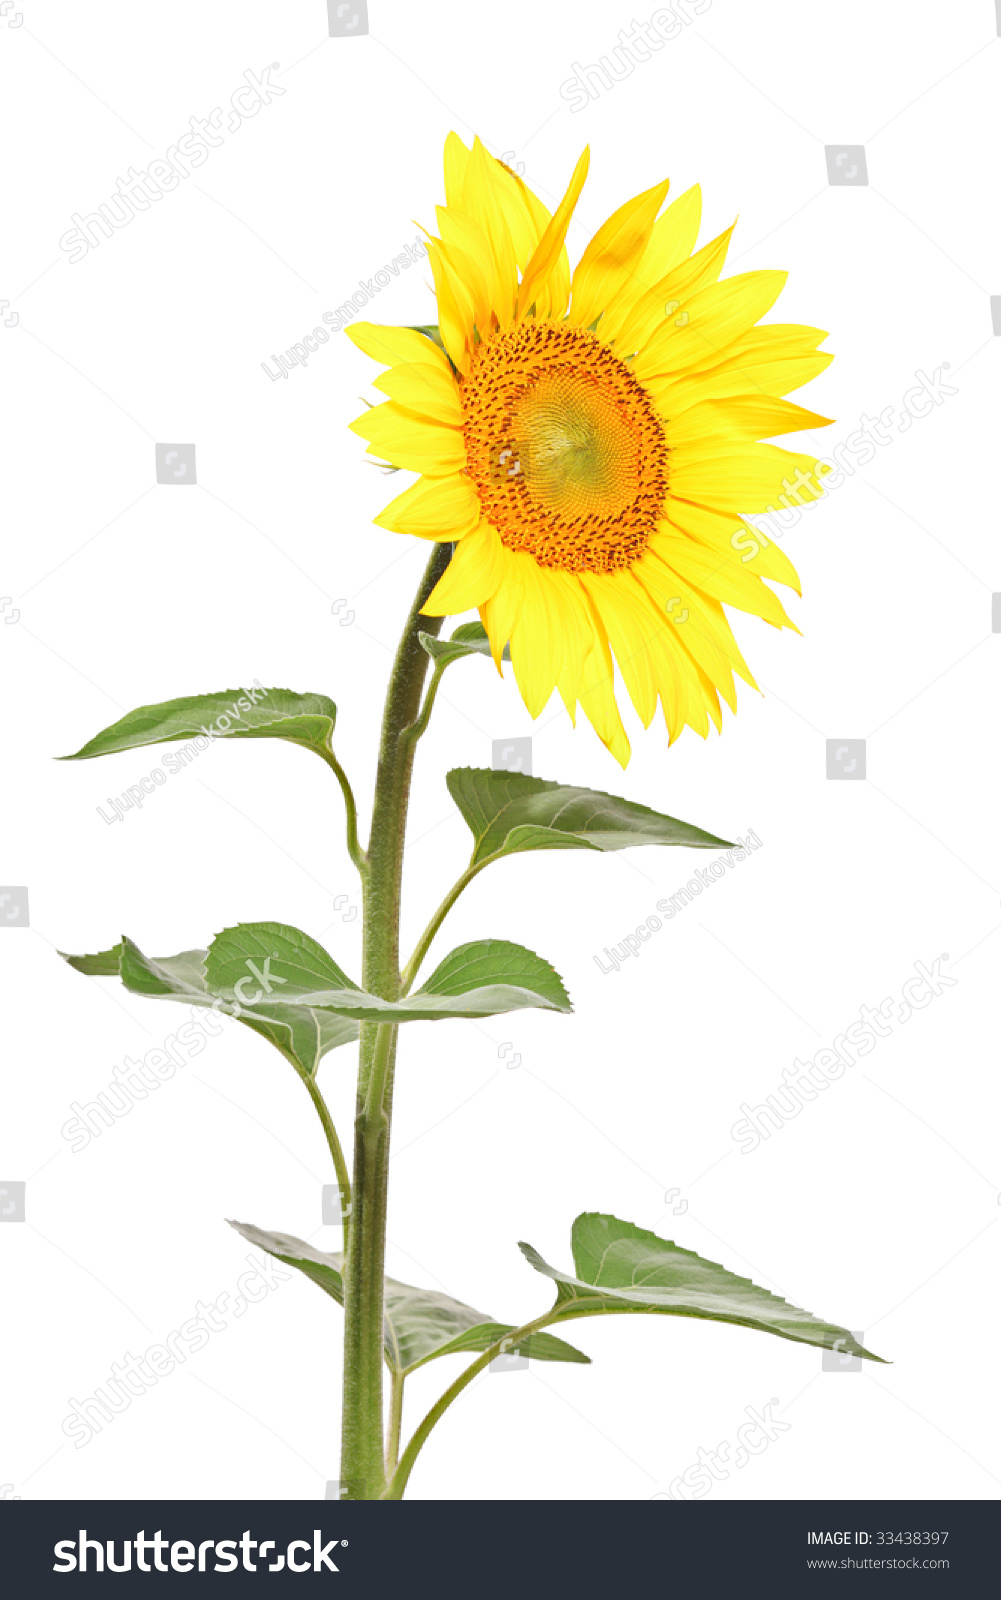 A View Of A Single Sunflower Against White Background Stock Photo 33438397 : Shutterstock